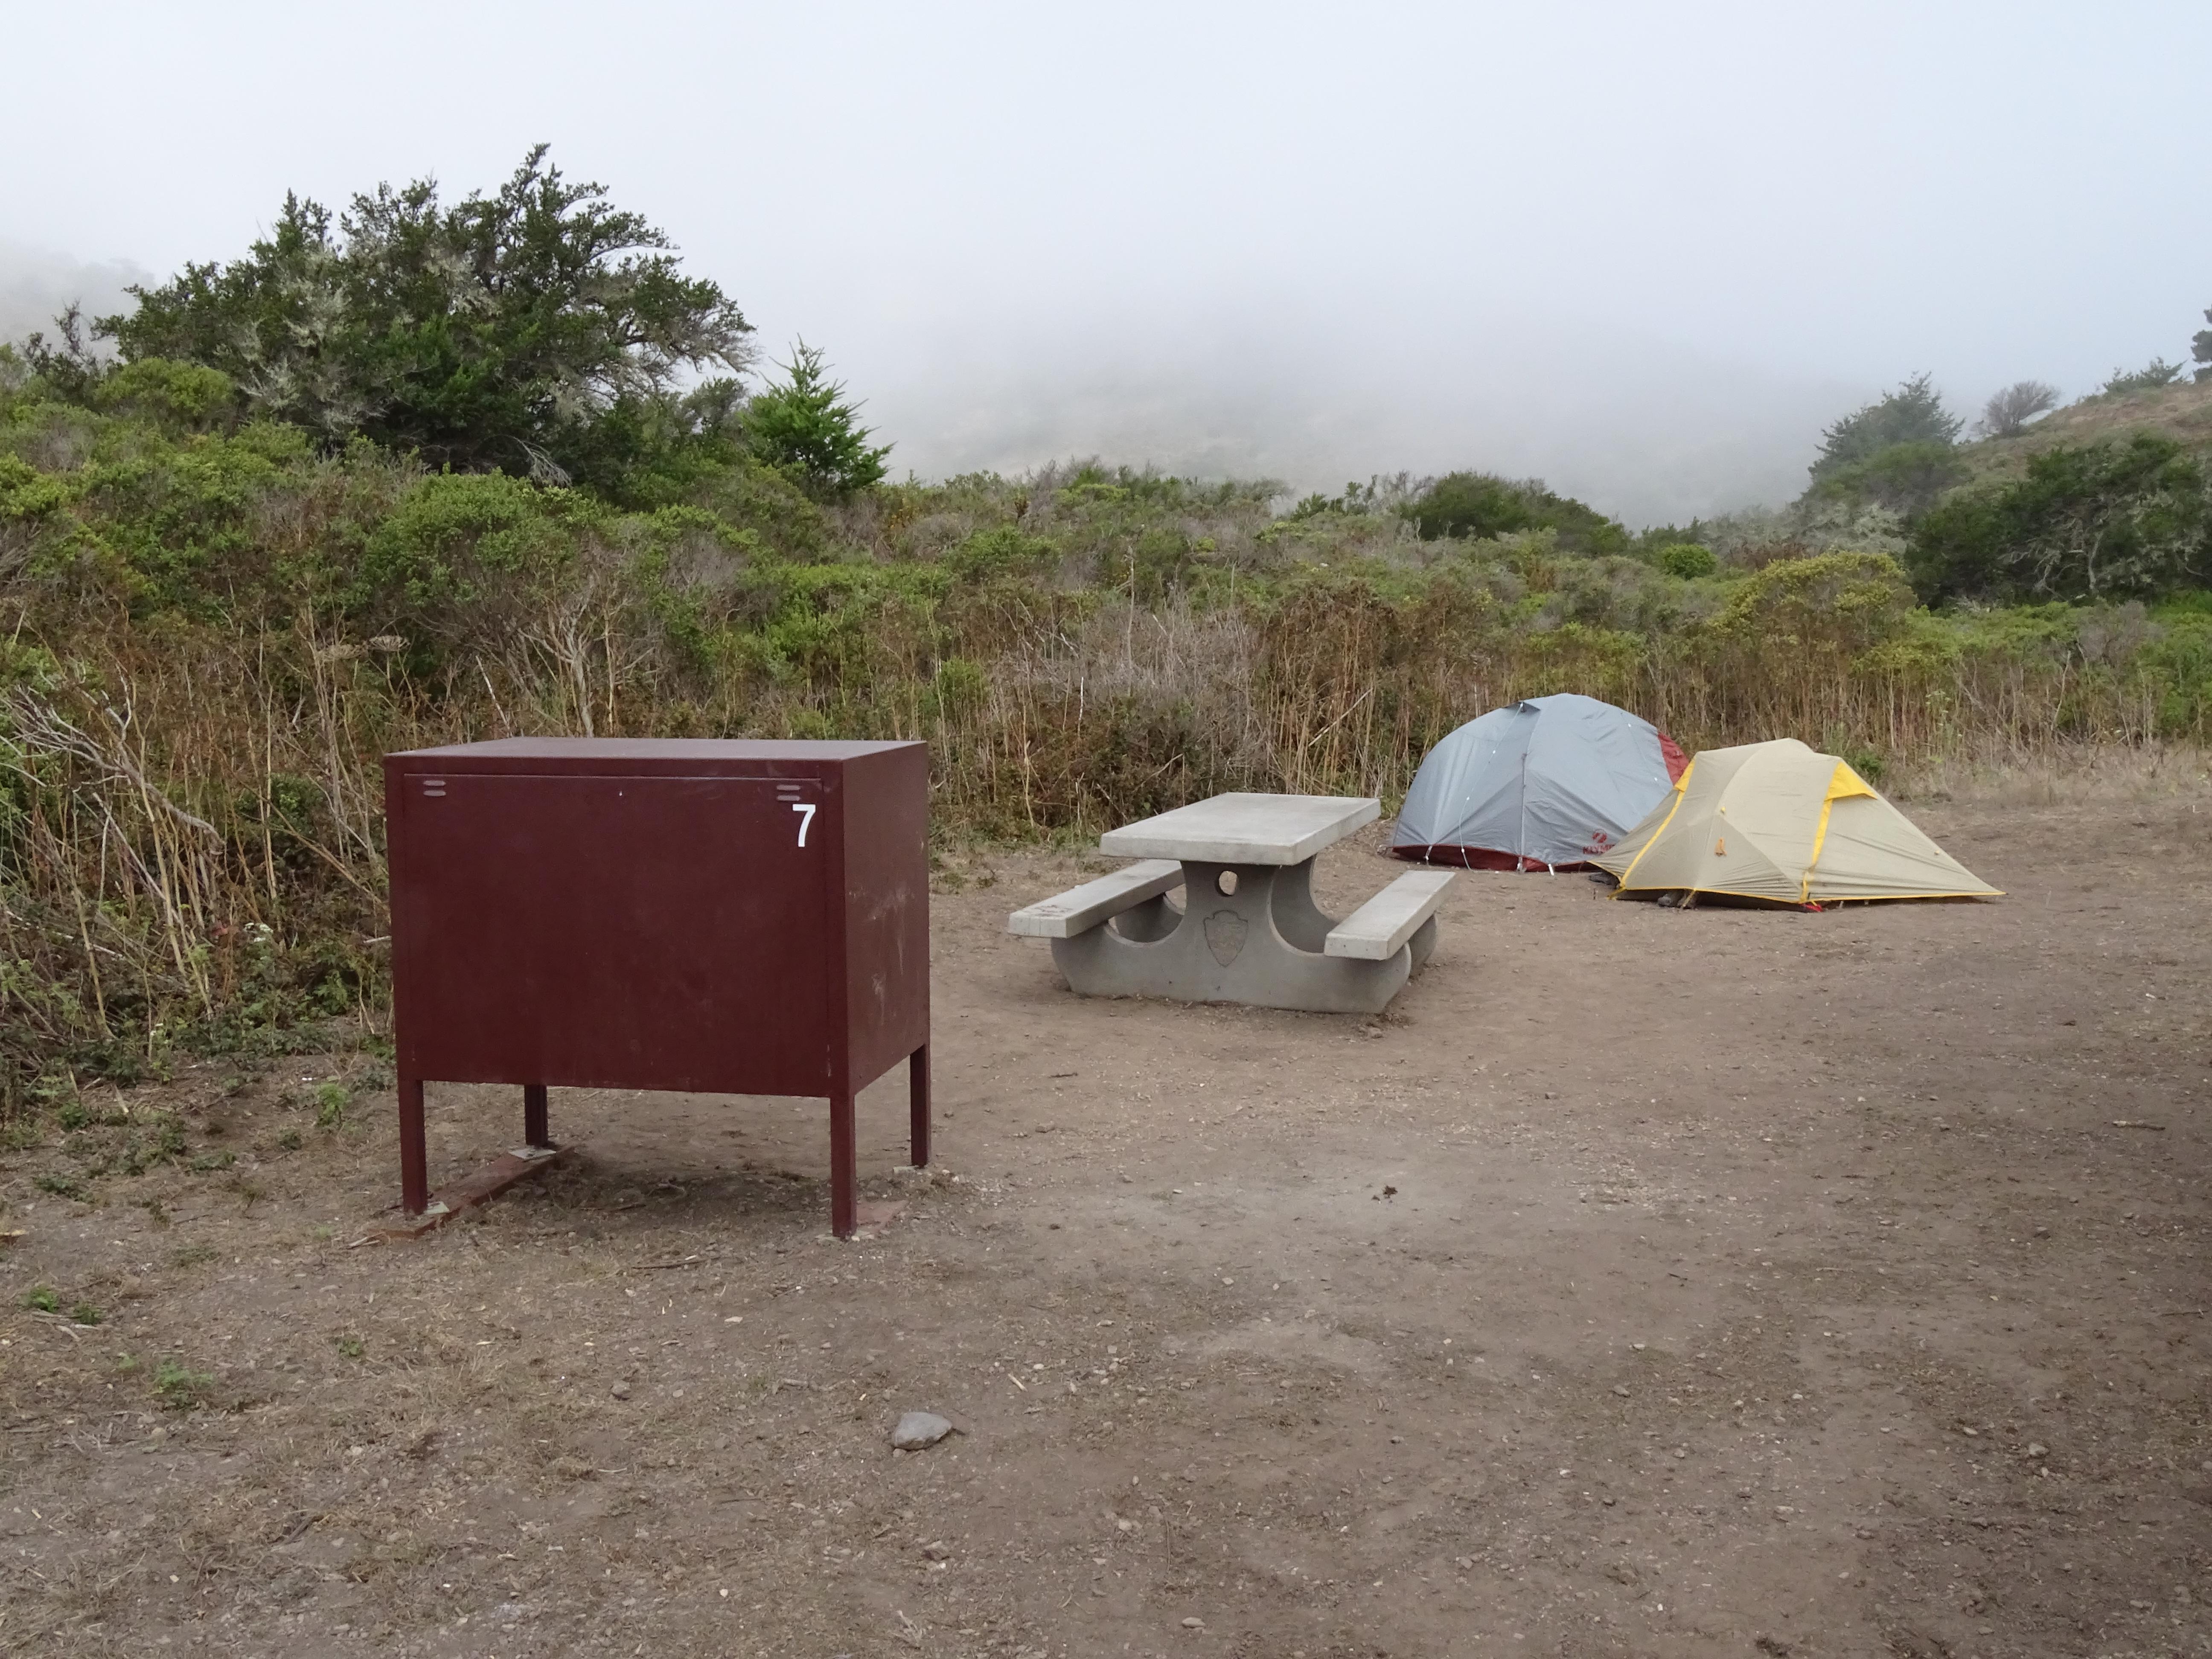 A campsite containing two small tents, a picnic table and a food storage locker.